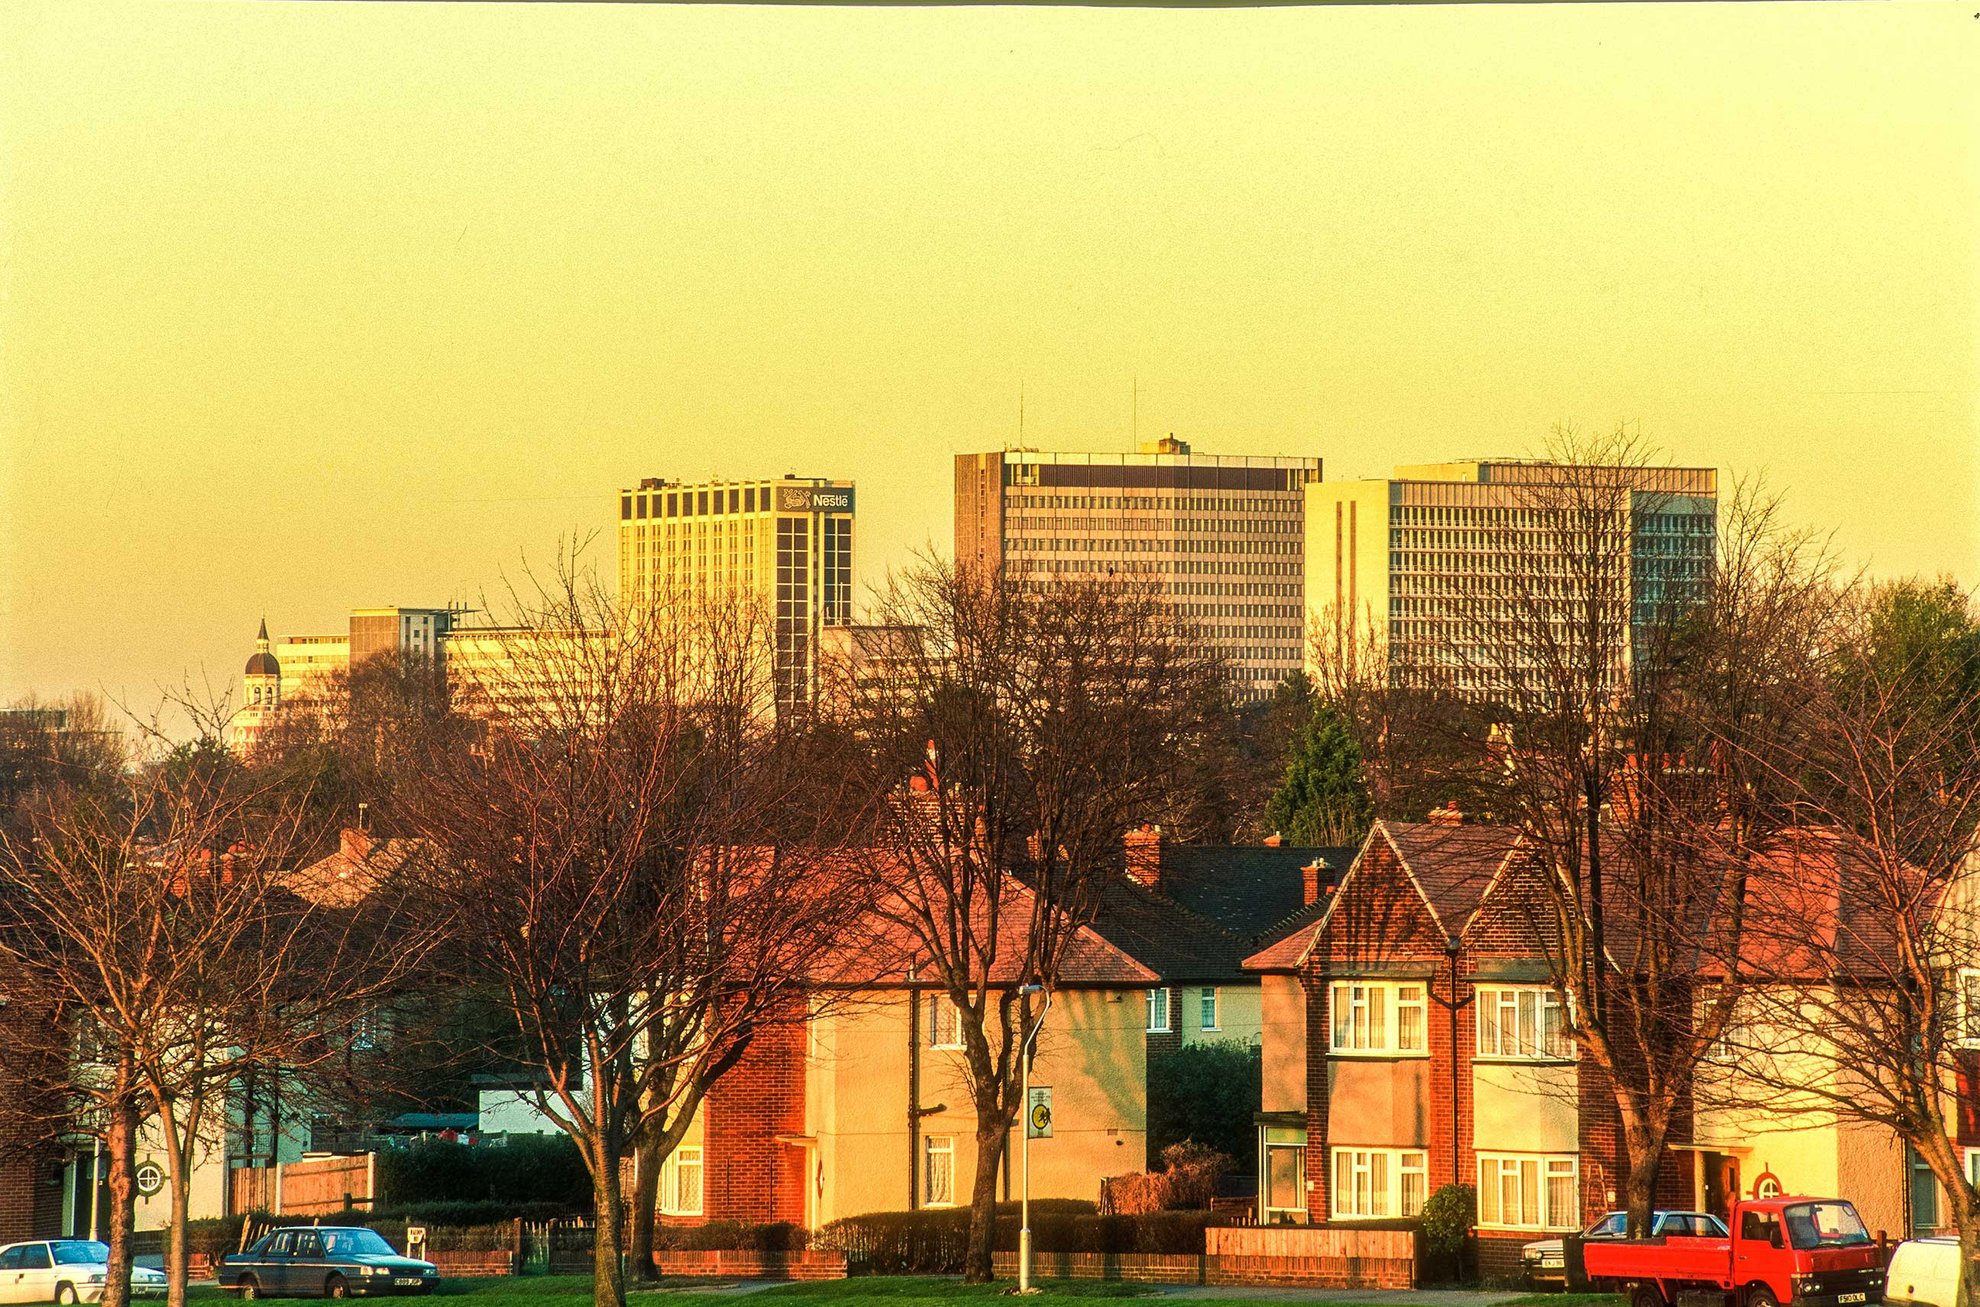 Croydon from Purley Way 1998